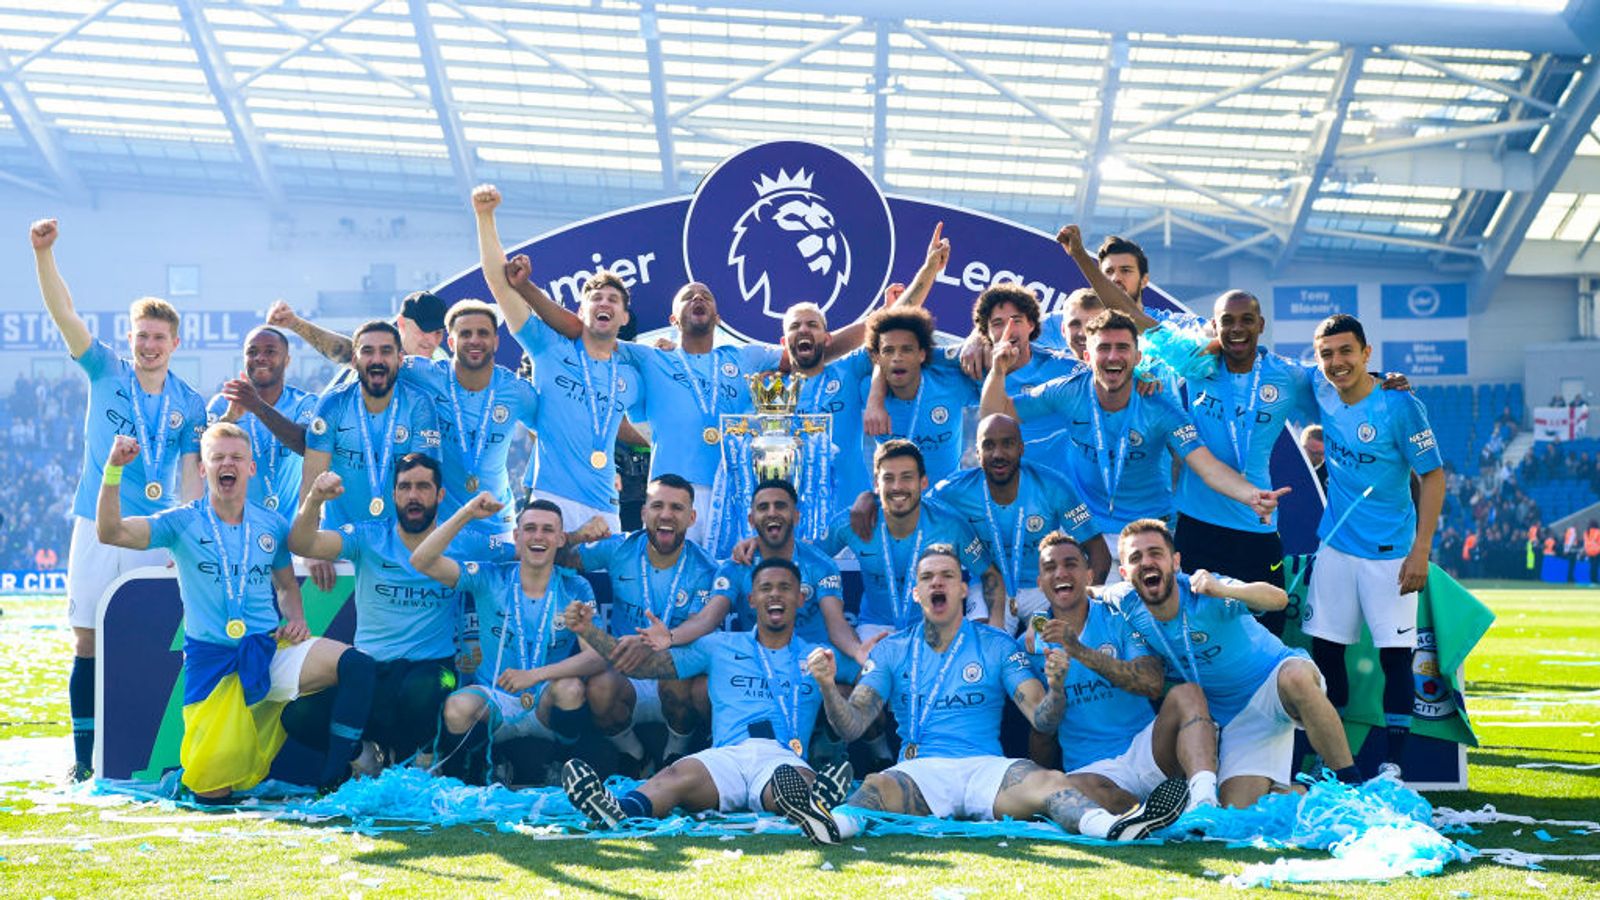 Gary Neville says Manchester City are the greatest Premier League team ever